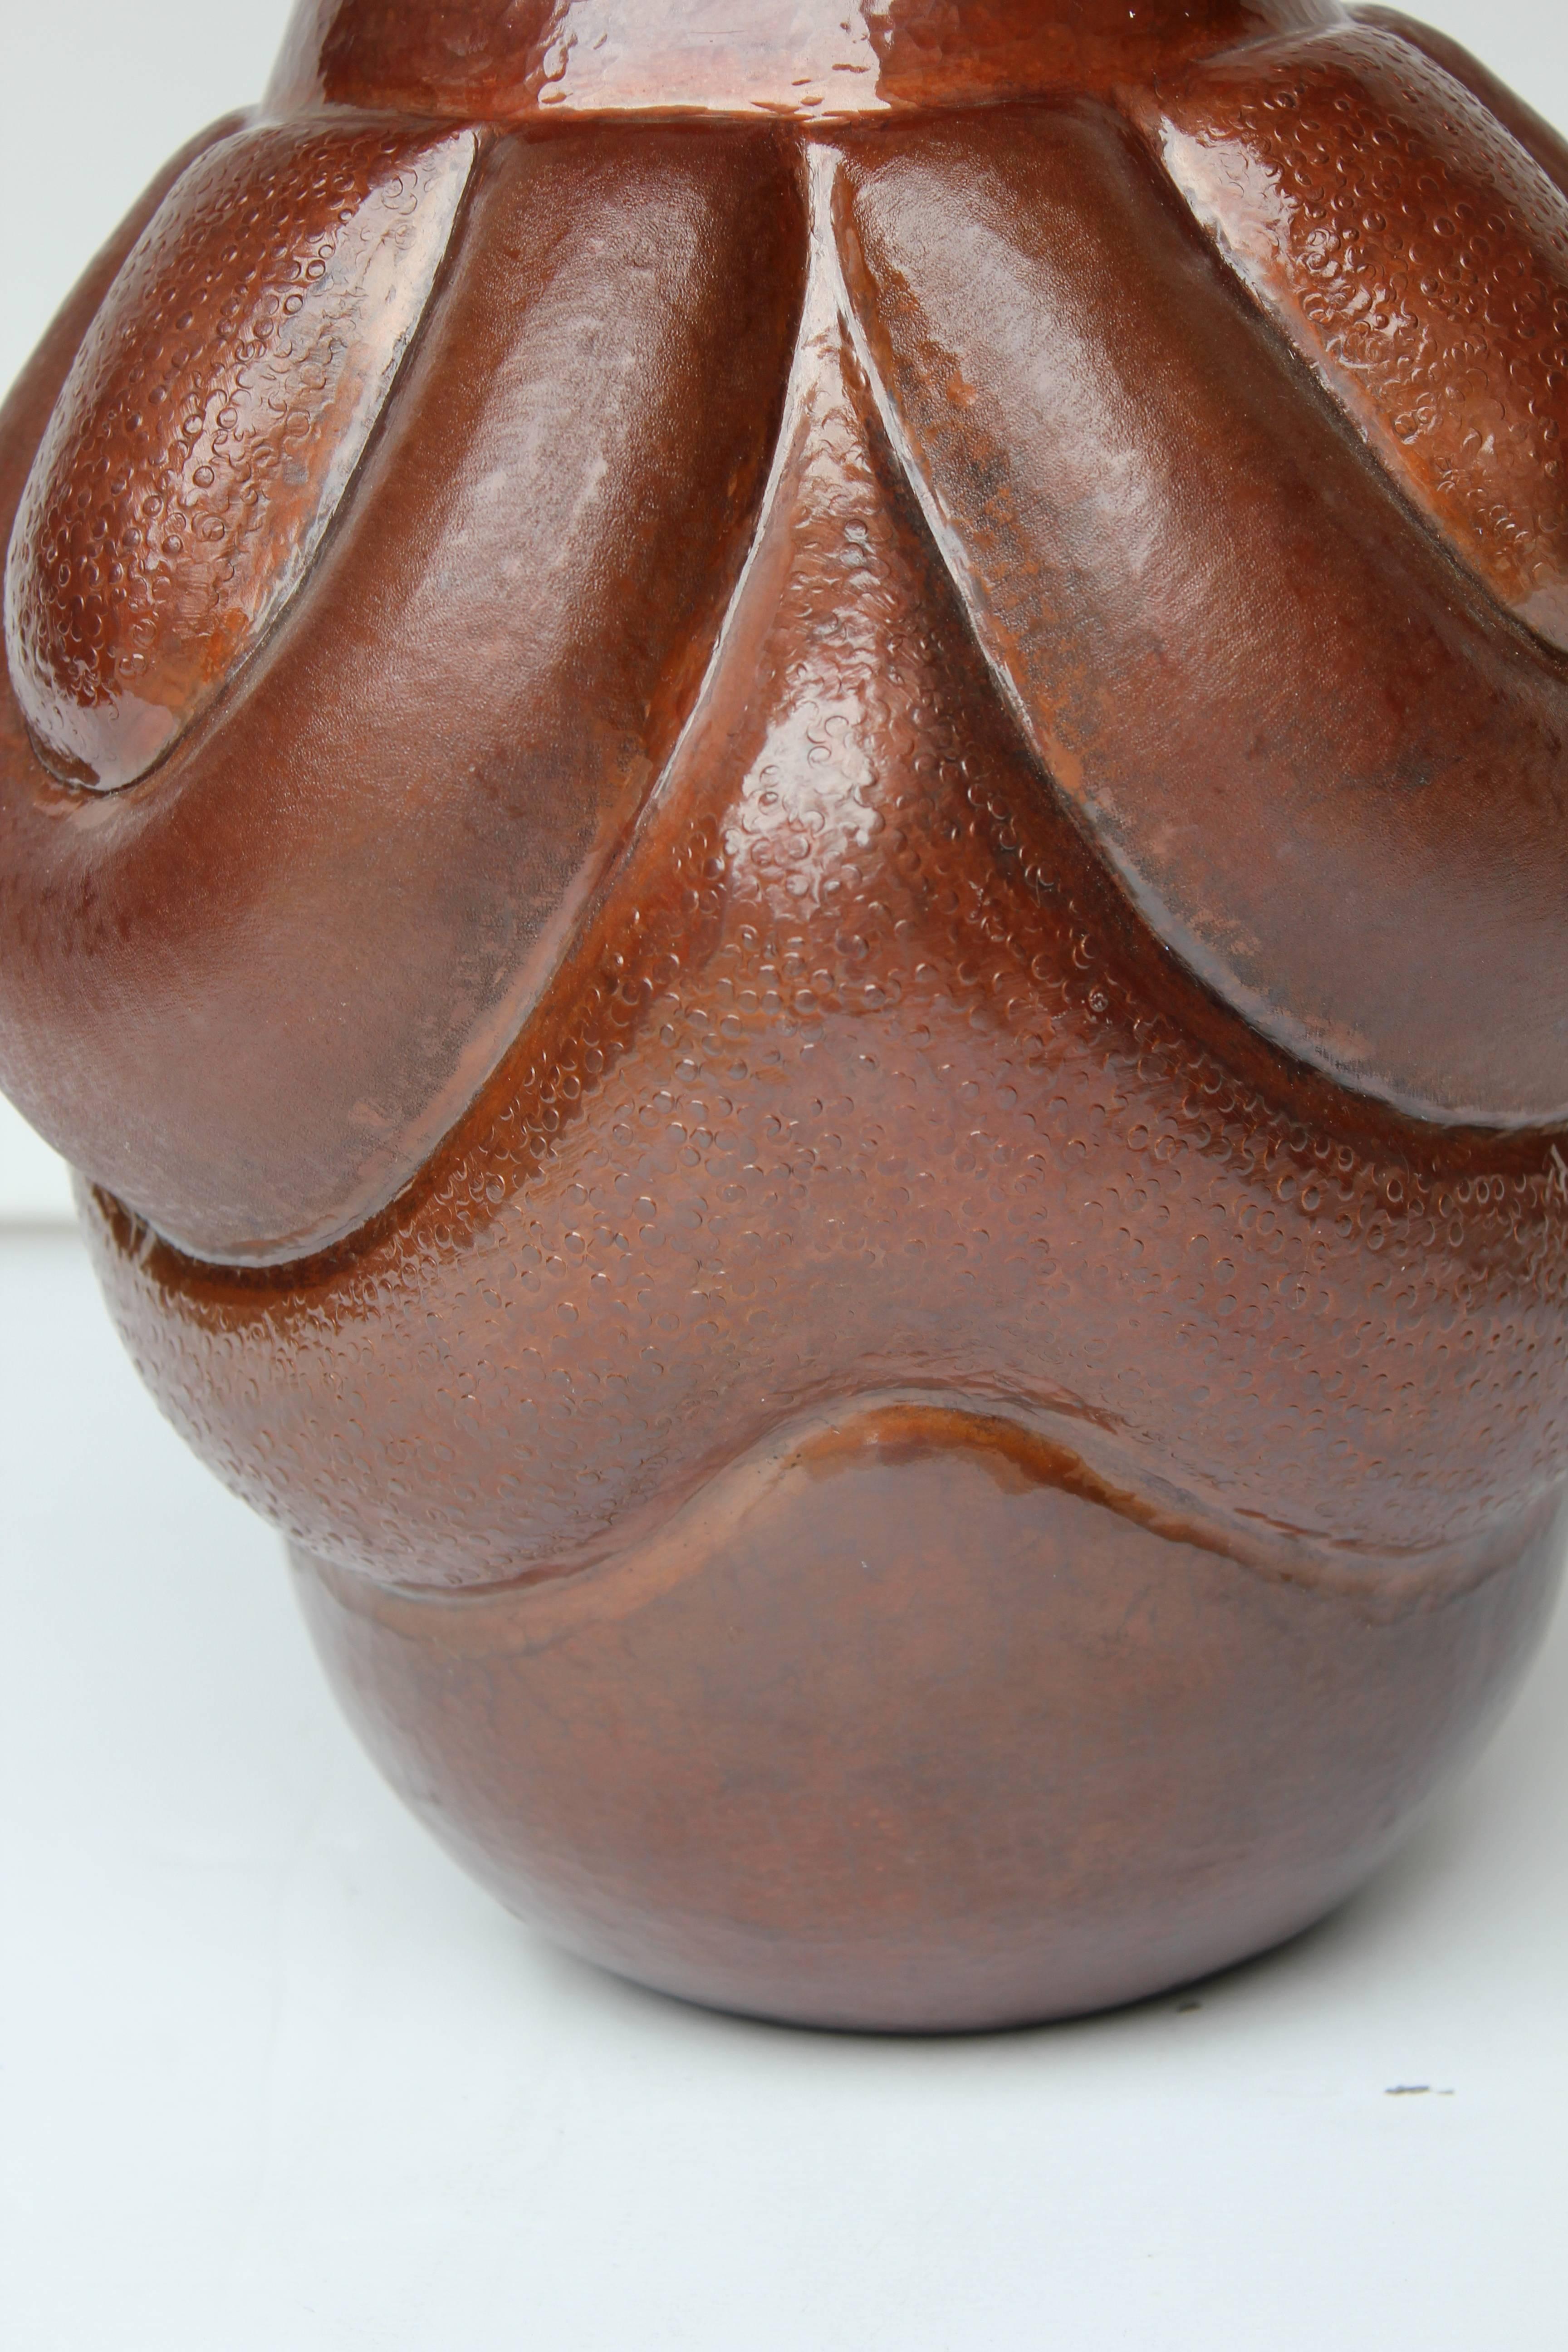 Hand-wrought copper vase from Michoacan, Mexico.